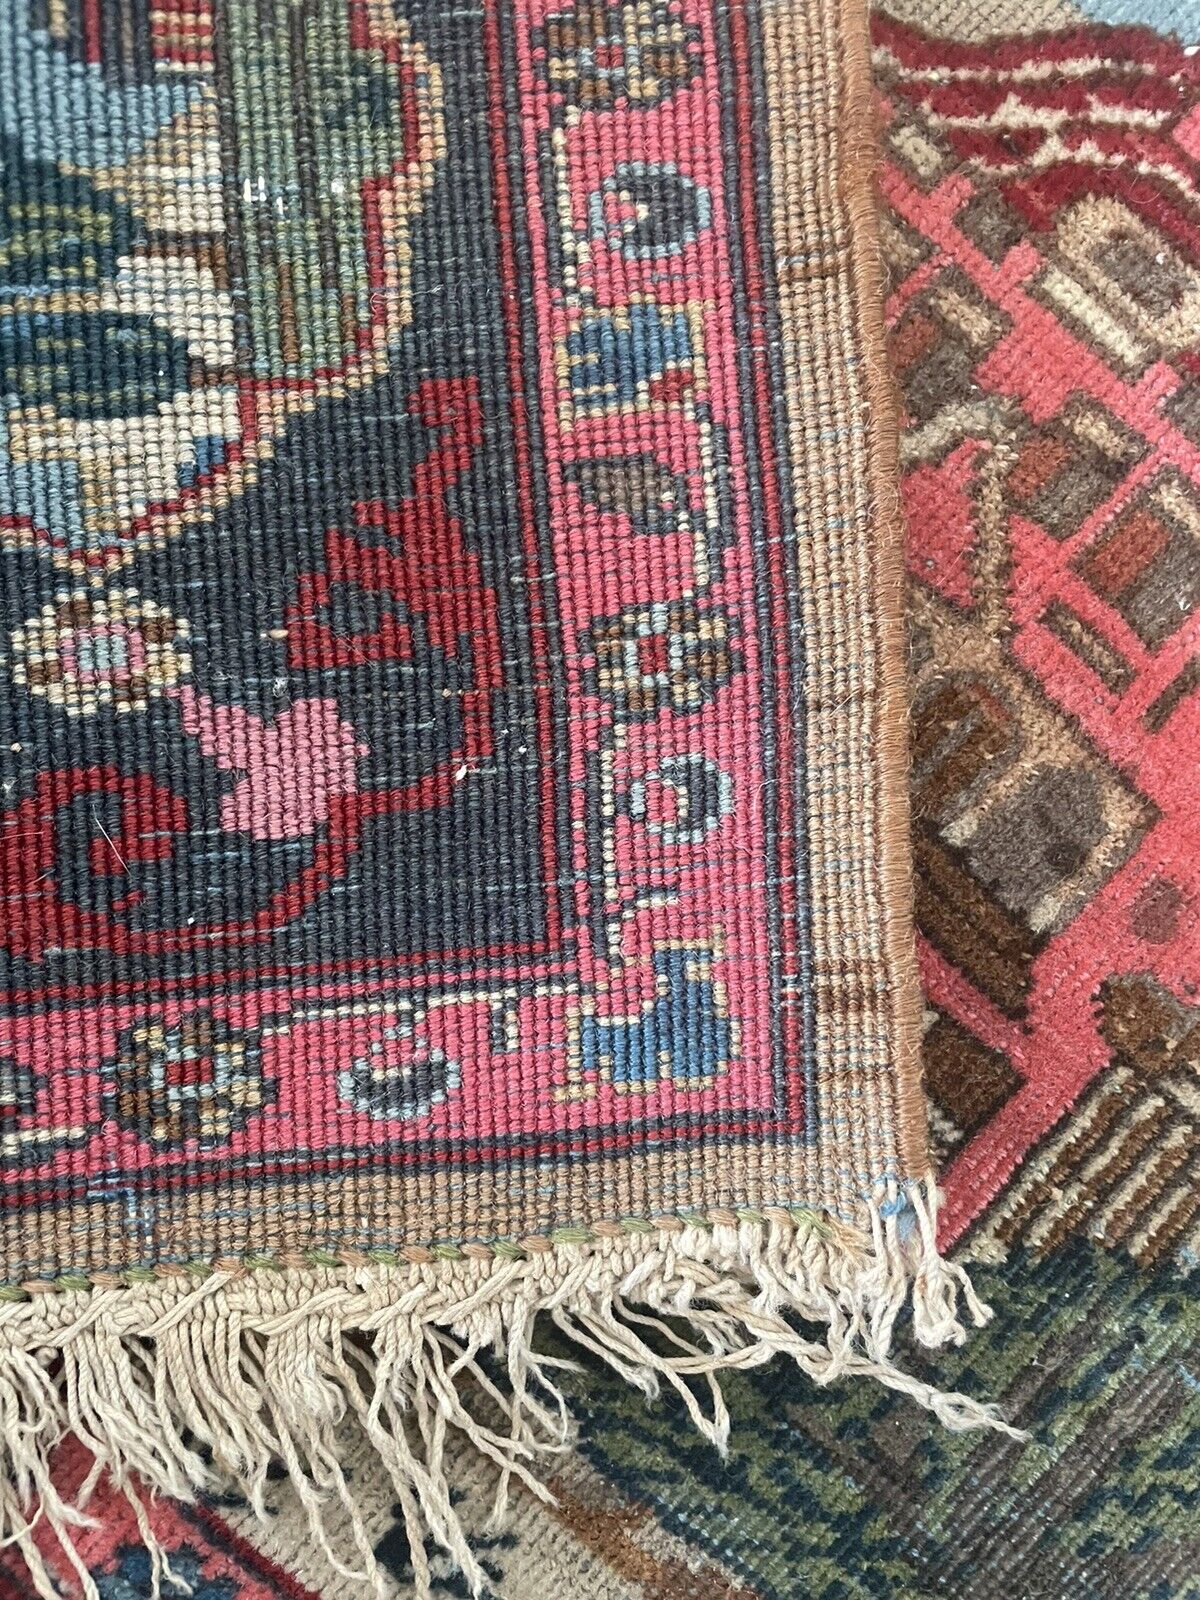 Back side of the Handmade Antique Persian Kashan Collectible Rug - Underside view revealing the rug's construction and material.